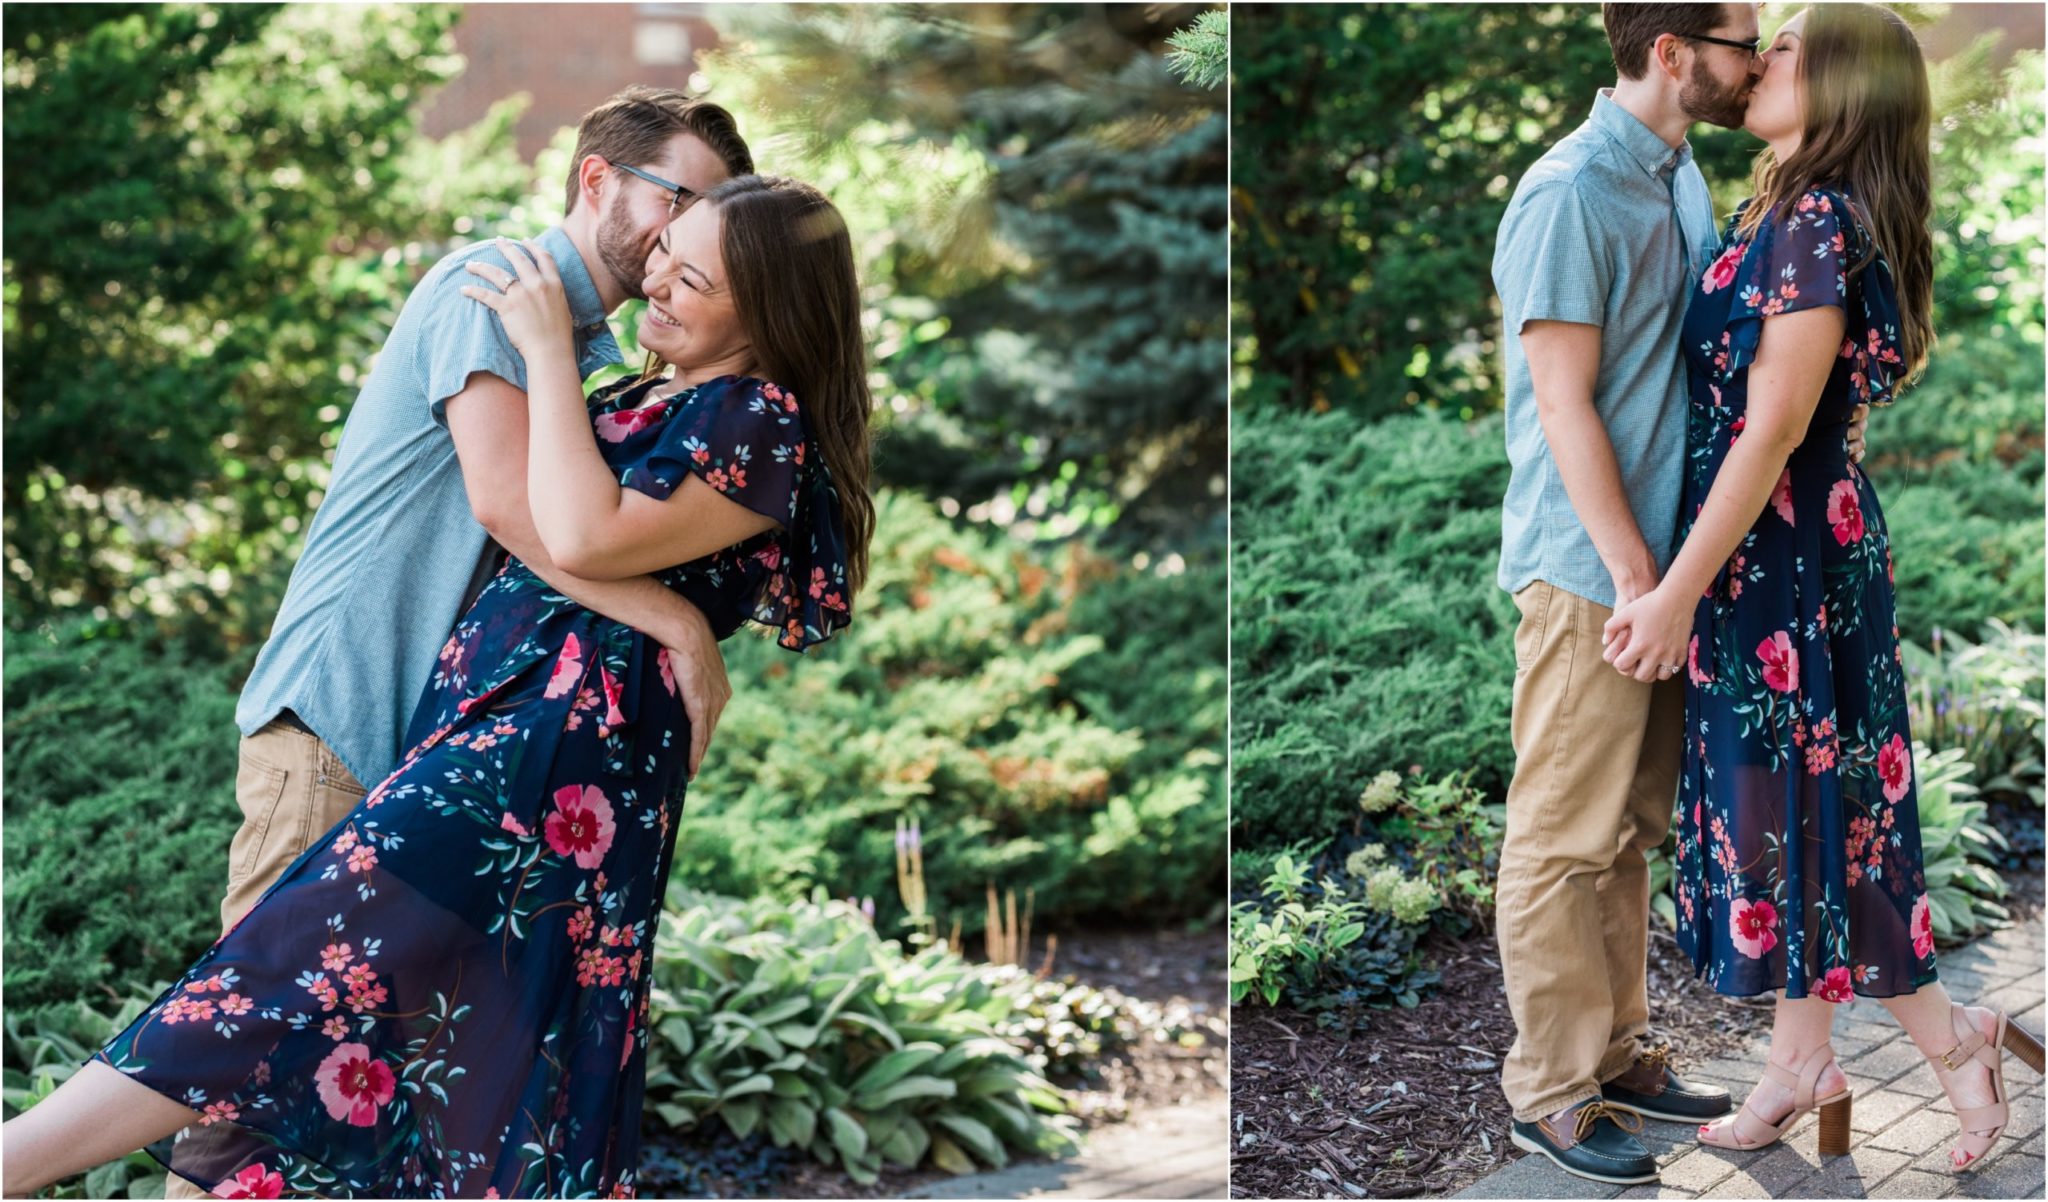 Collage image of a couple kissing dipping in a vibrant garden.